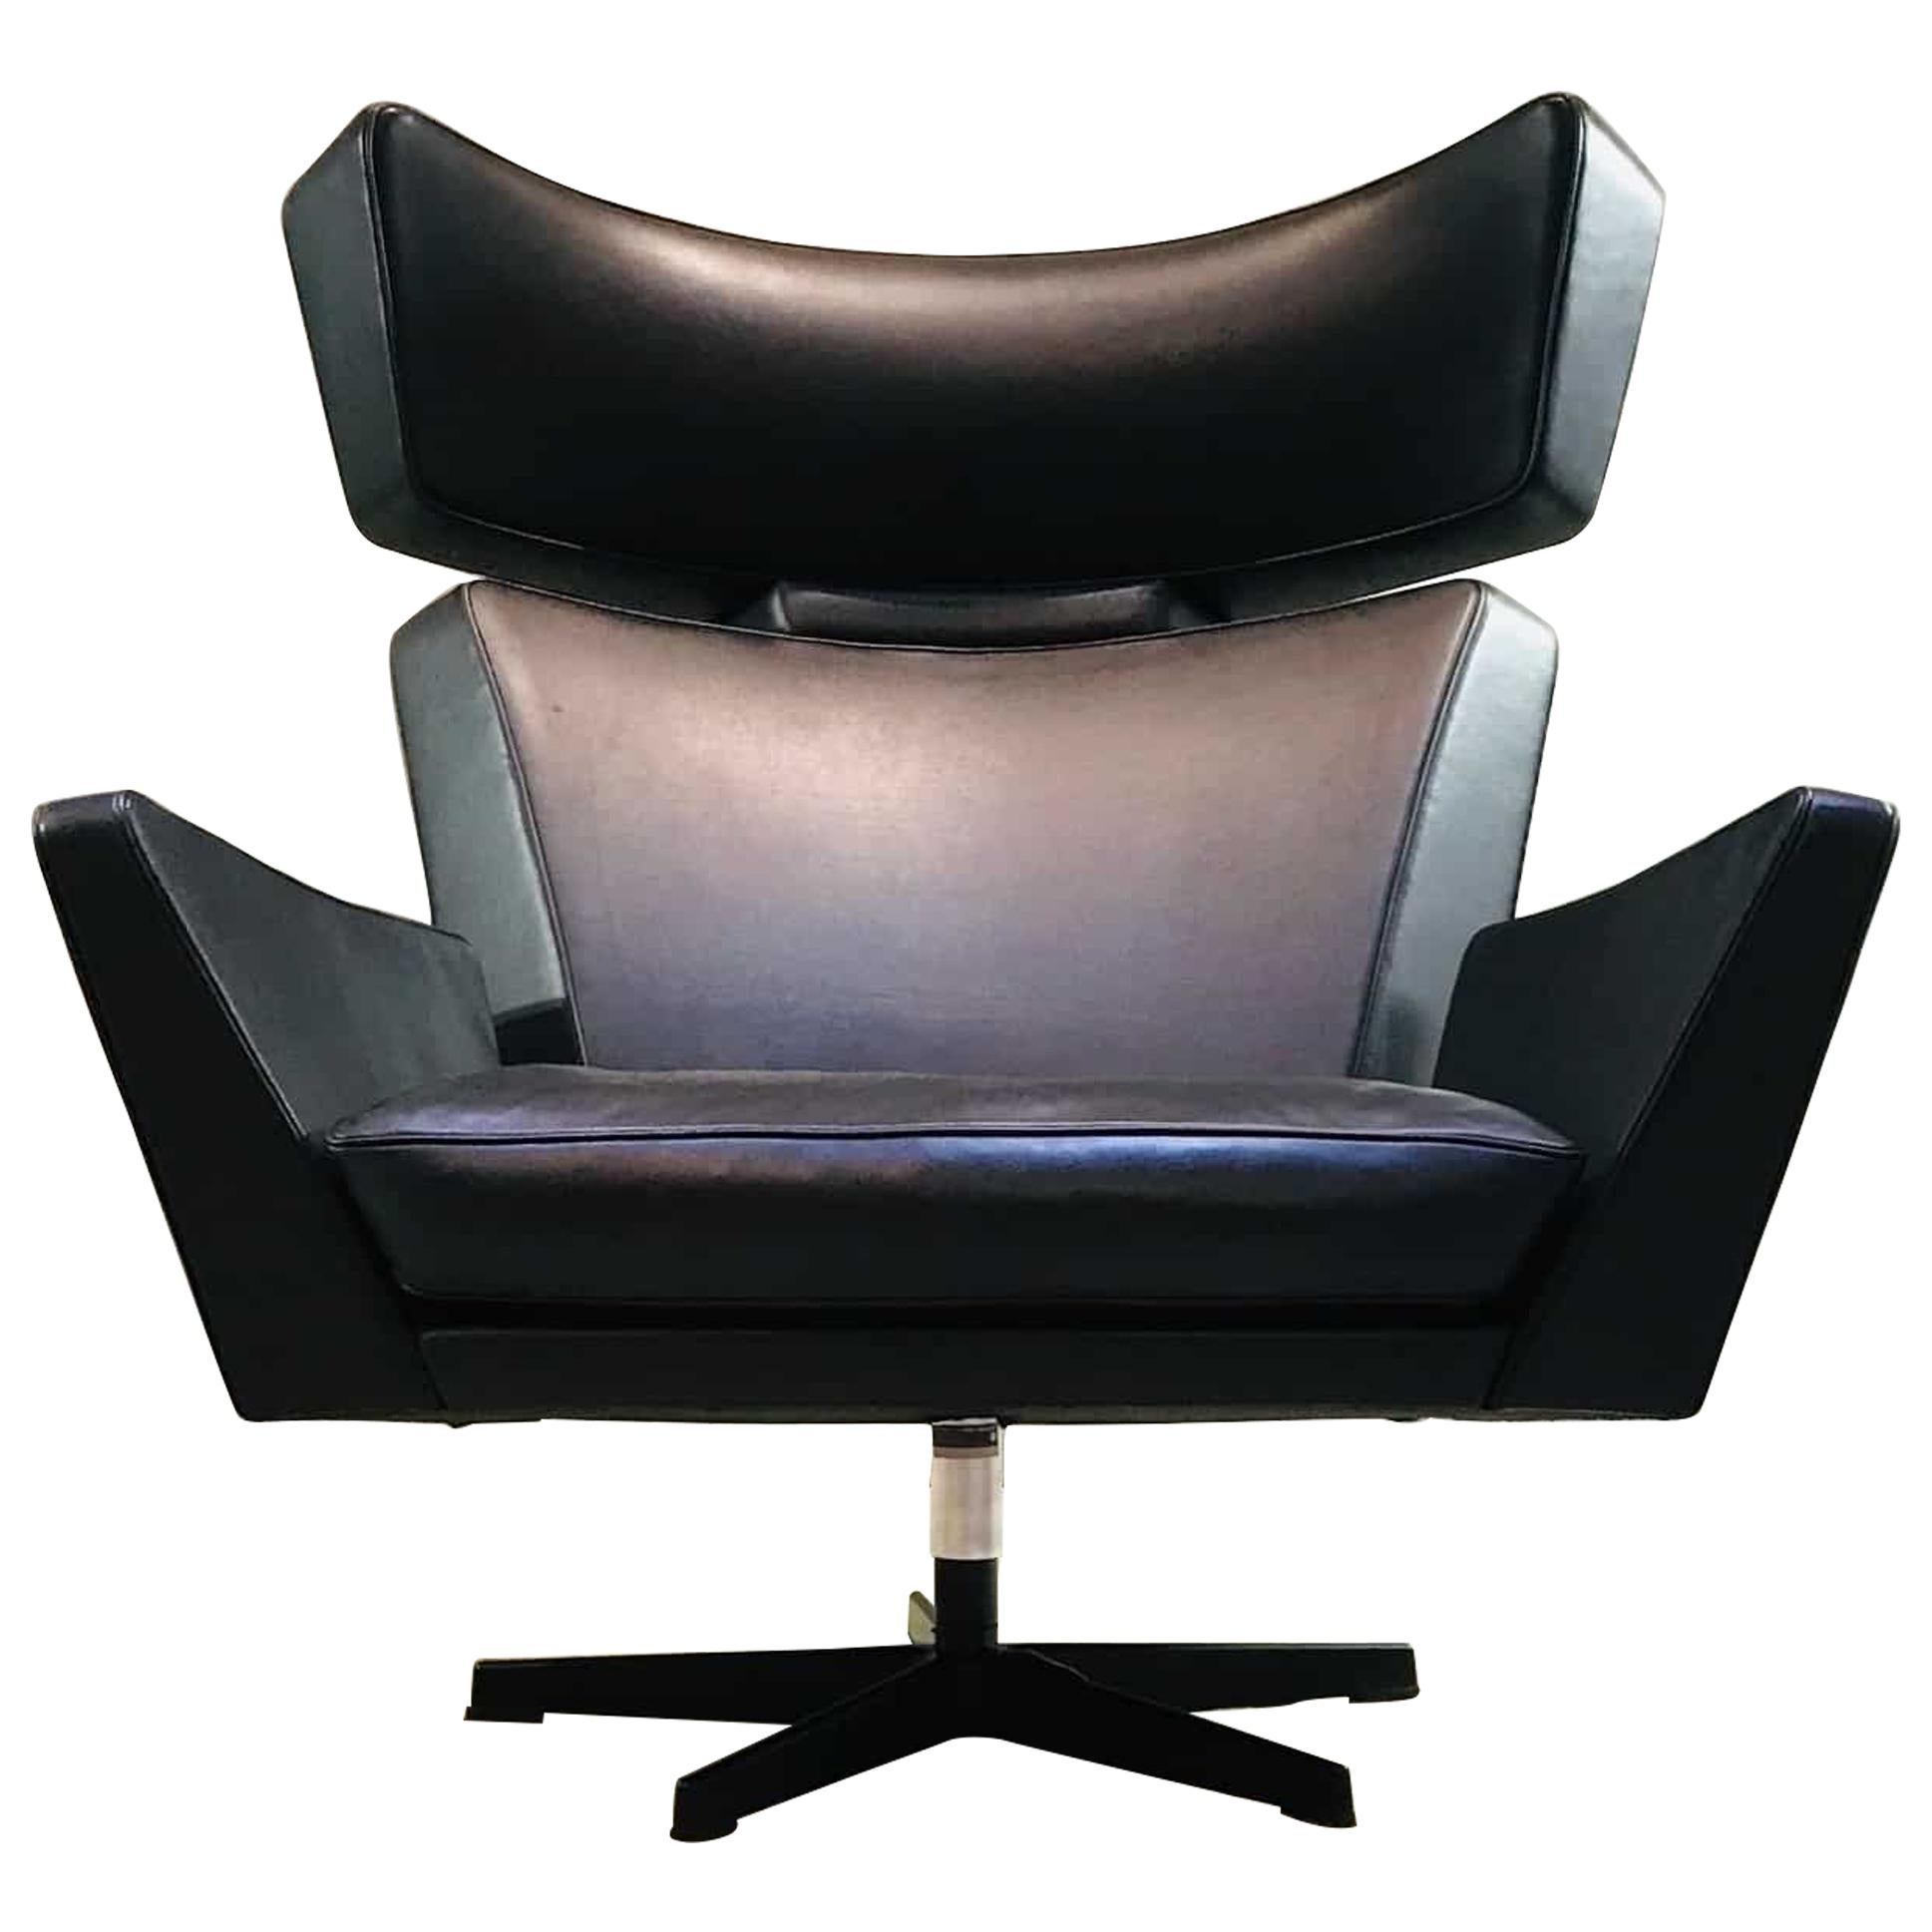 Midcentury Black Leather Lounge Chair by Arne Jacobsen Oksen, Ox Chair For Sale